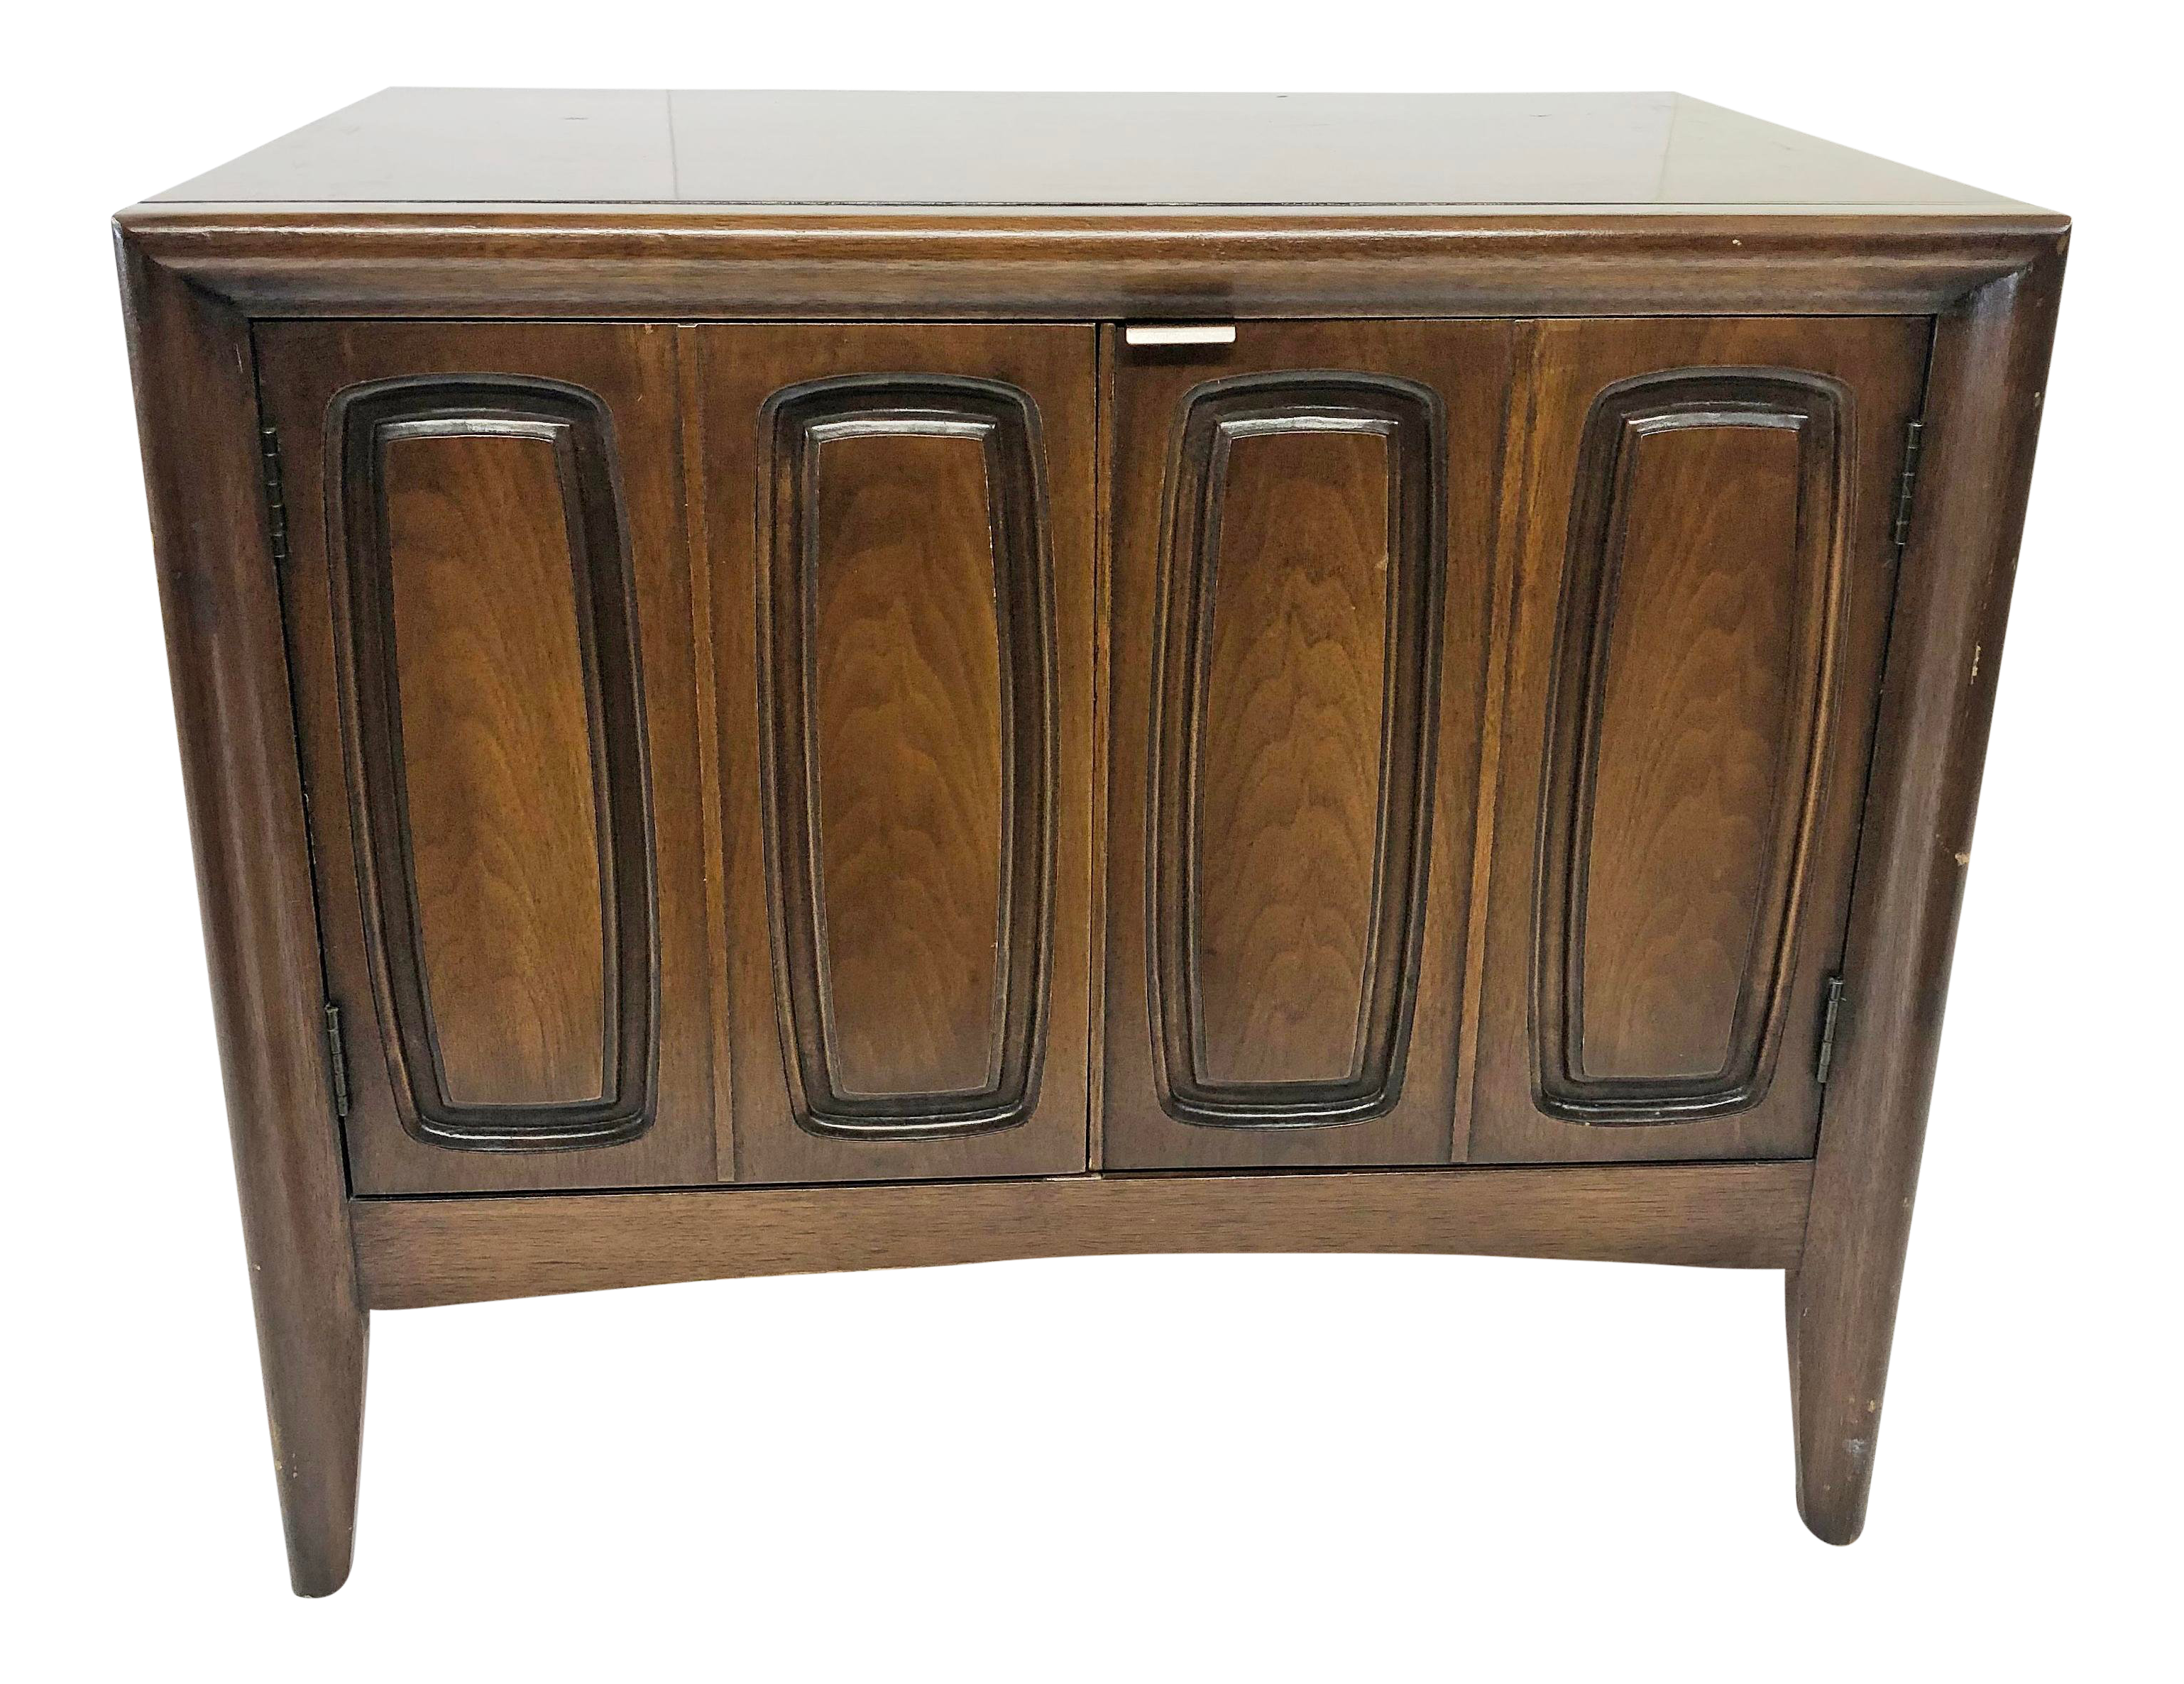 gently used broyhill furniture off chairish mid century modern emphasis record cabinet accent table definition outside patio piece pub set drawer mirrored bedside bar height